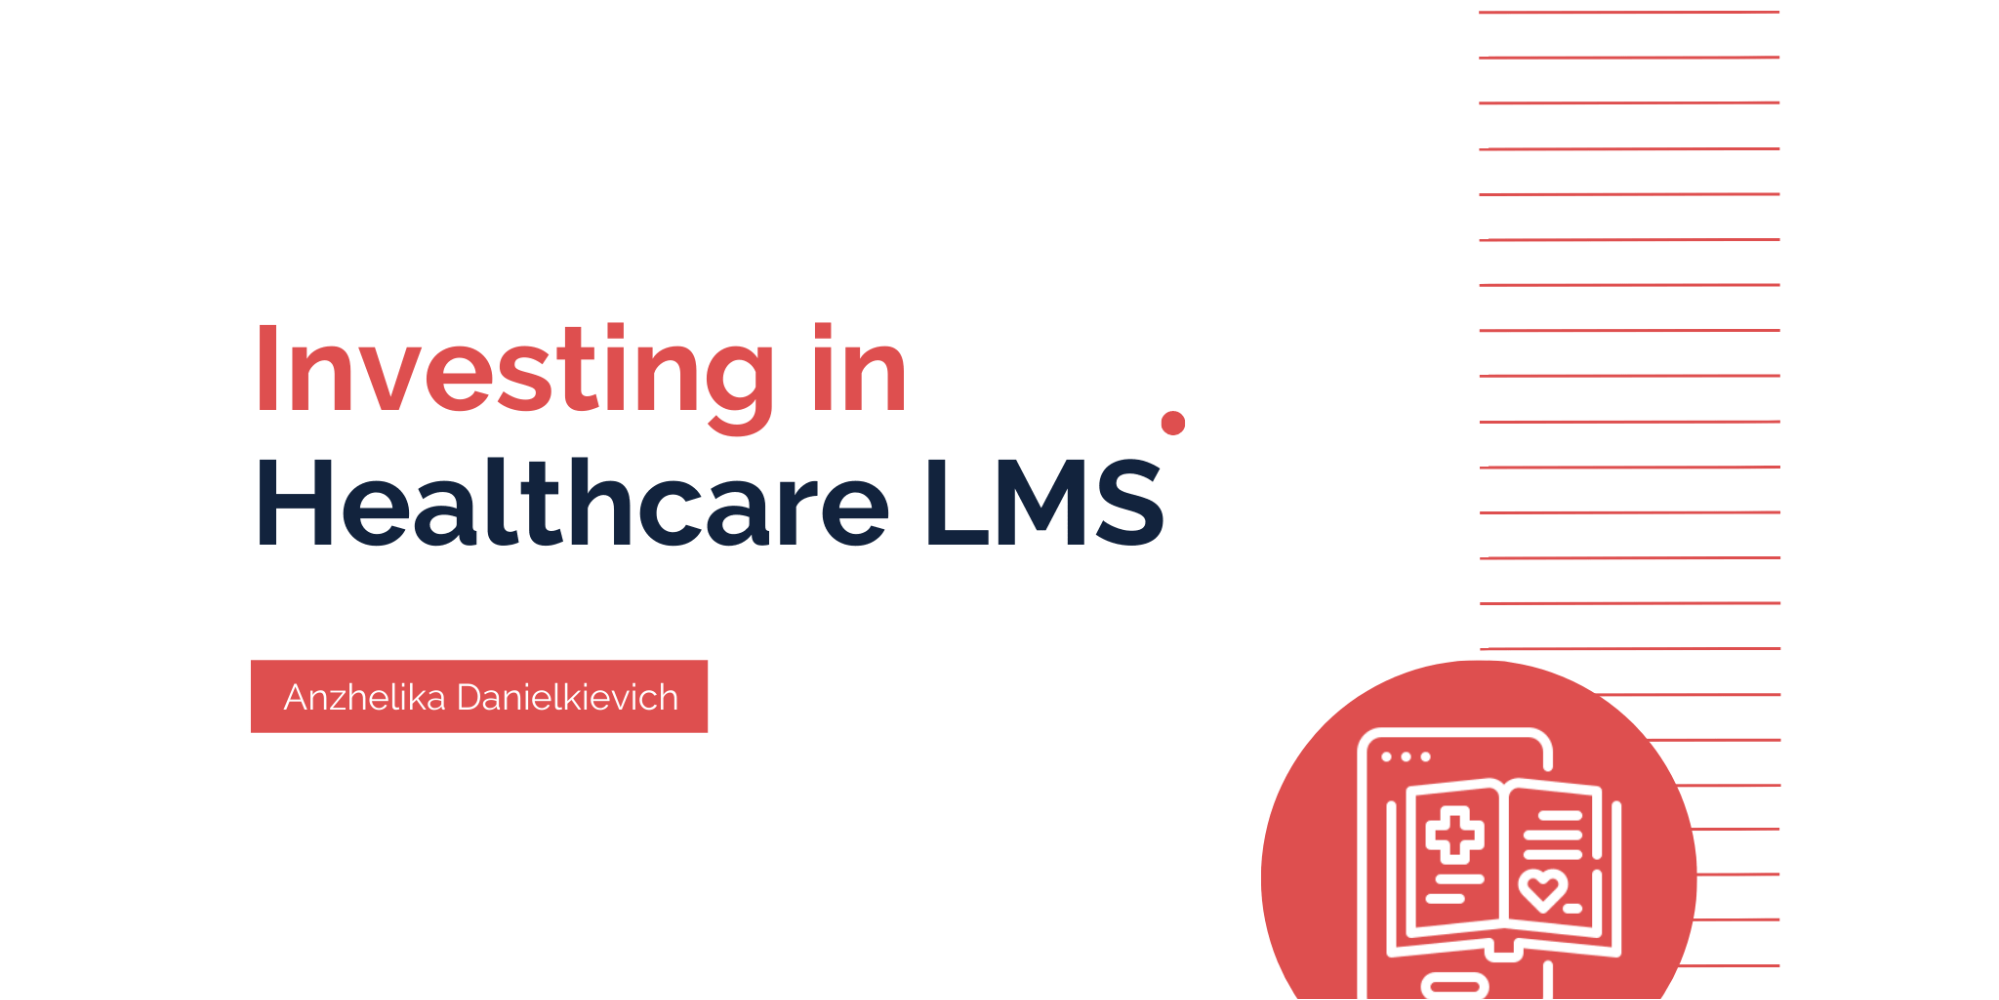 How Investing in Healthcare LMS Today Will Pay You Back Tomorrow